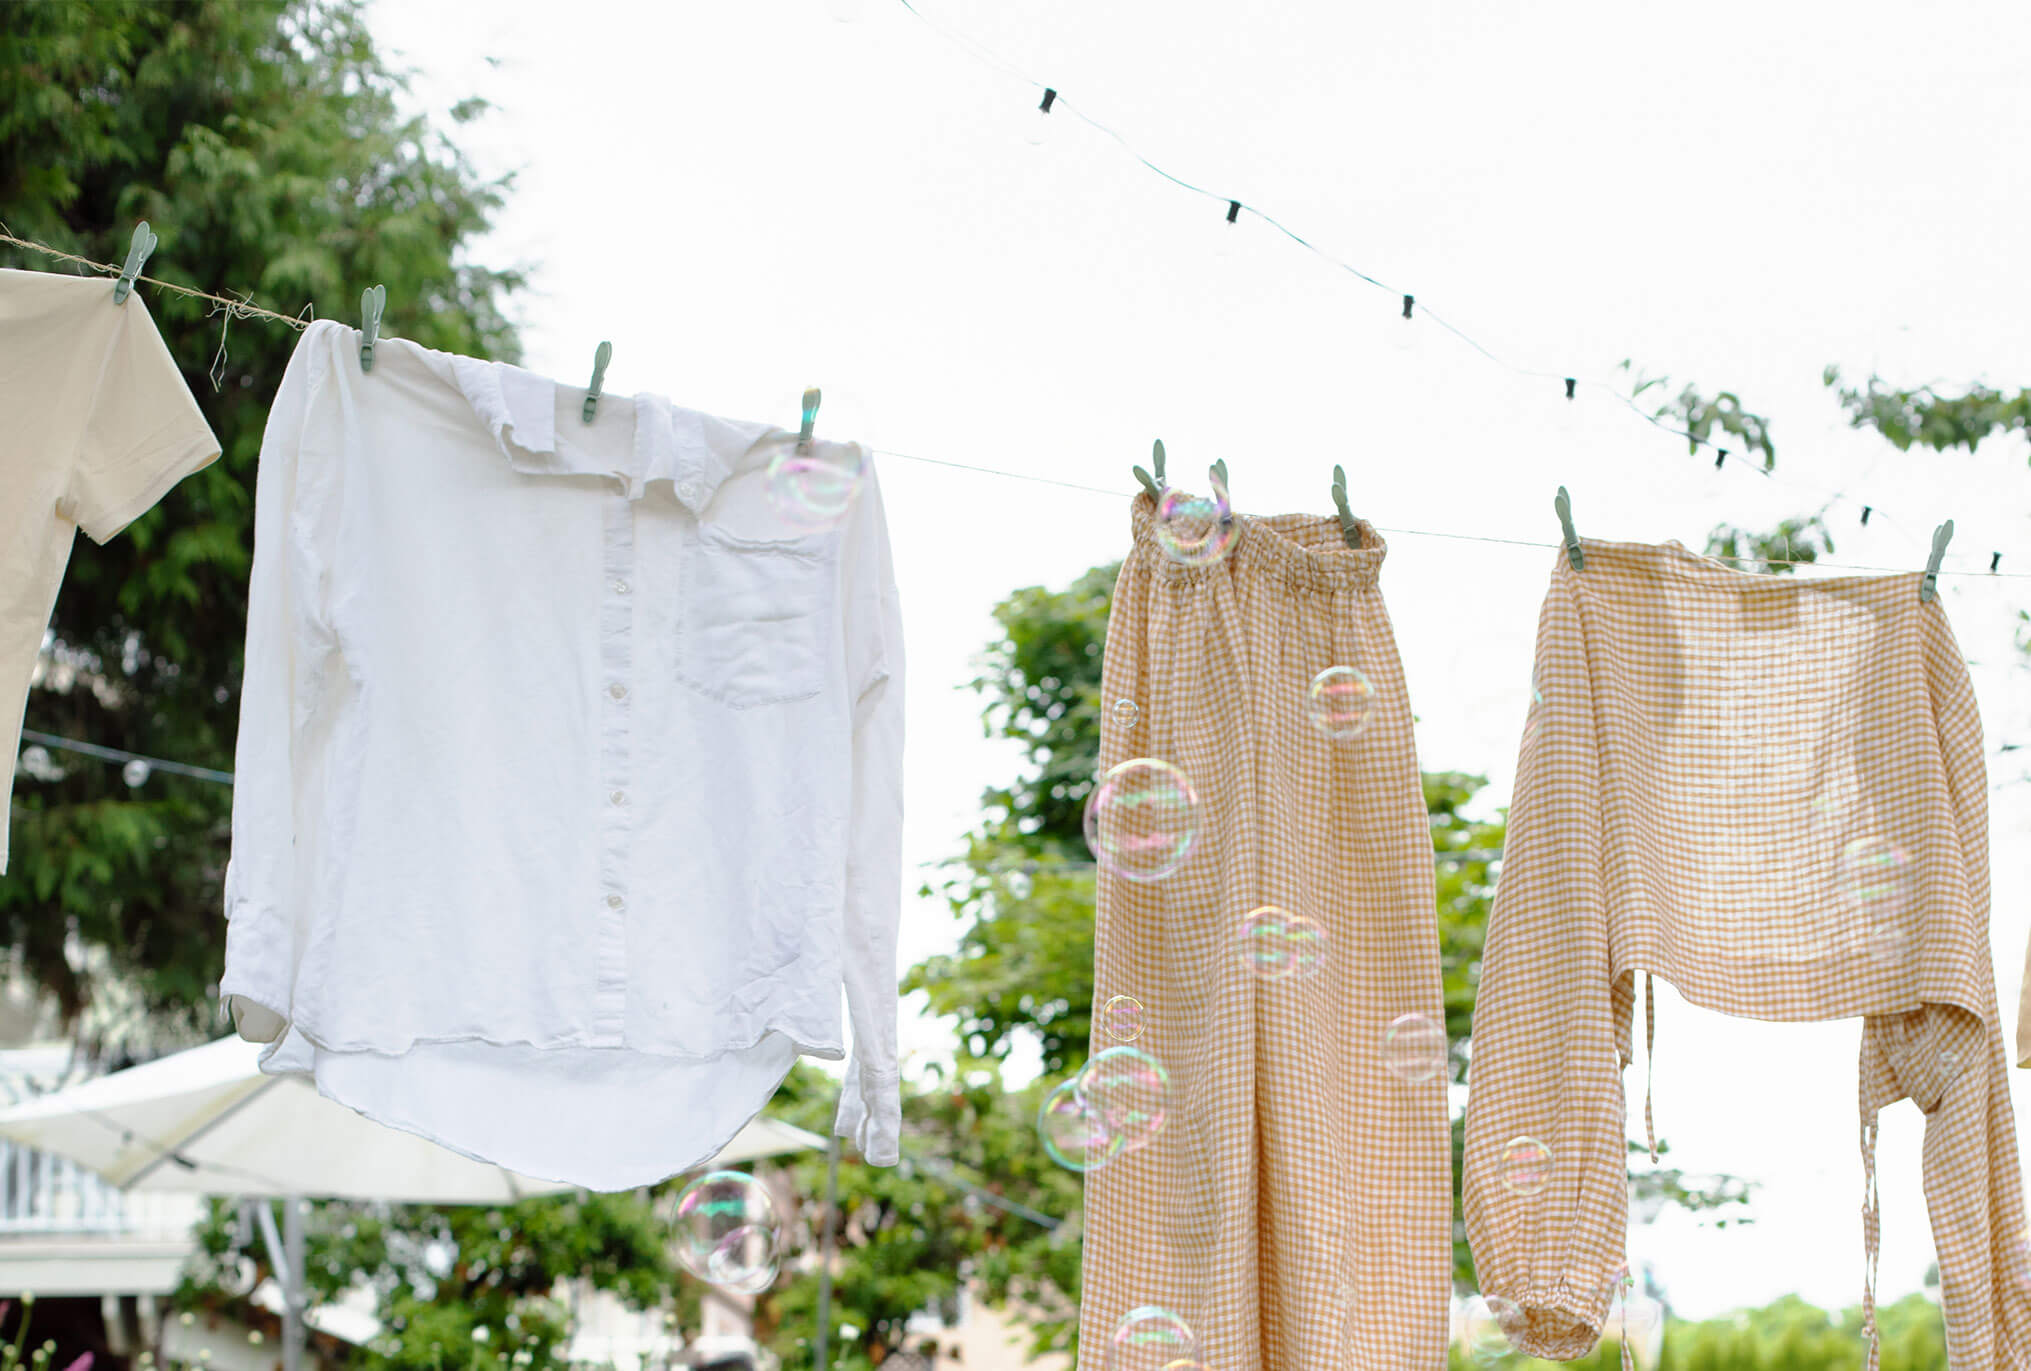 Using AspenClean laundry detergent, clothes are drying